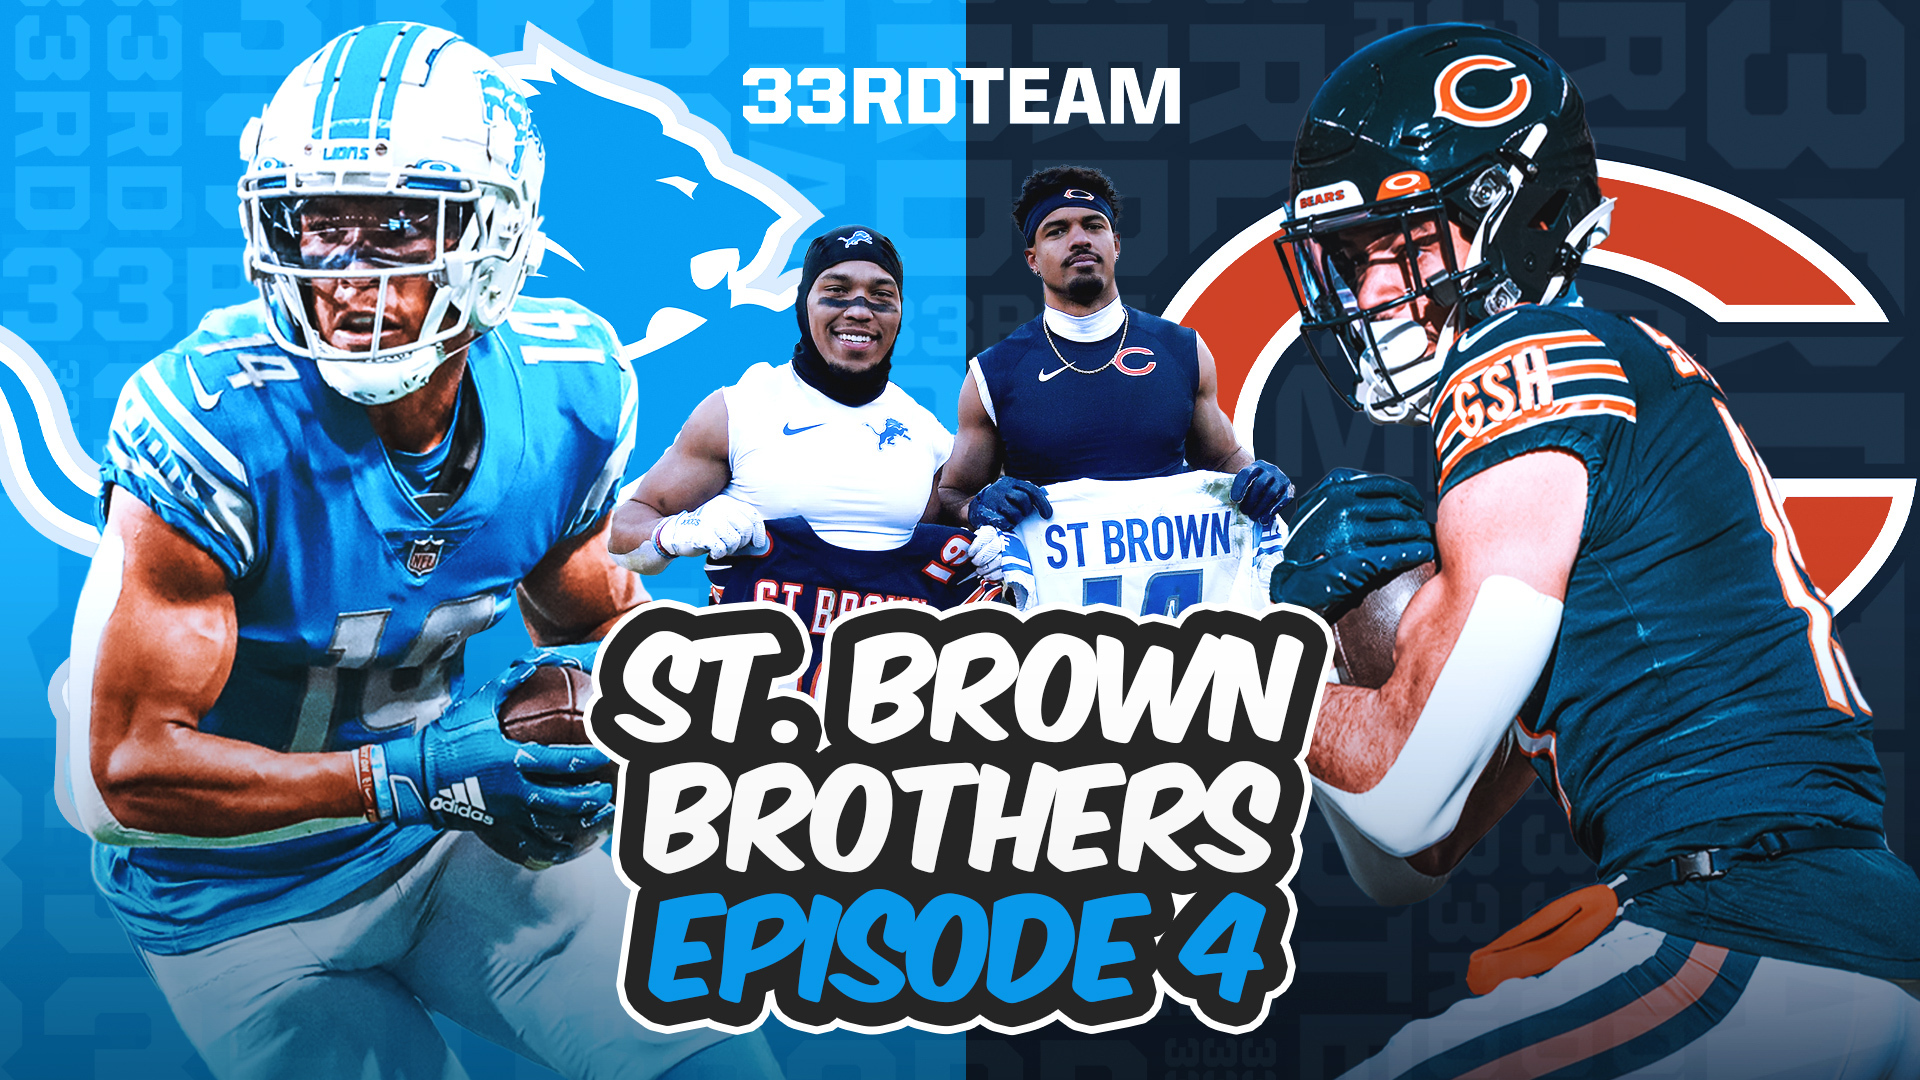 St. Brown Brothers Ep. 4: Bros Big Games, Jaire Alexander Talking Smack, USC Loses in Pac-12 Championship